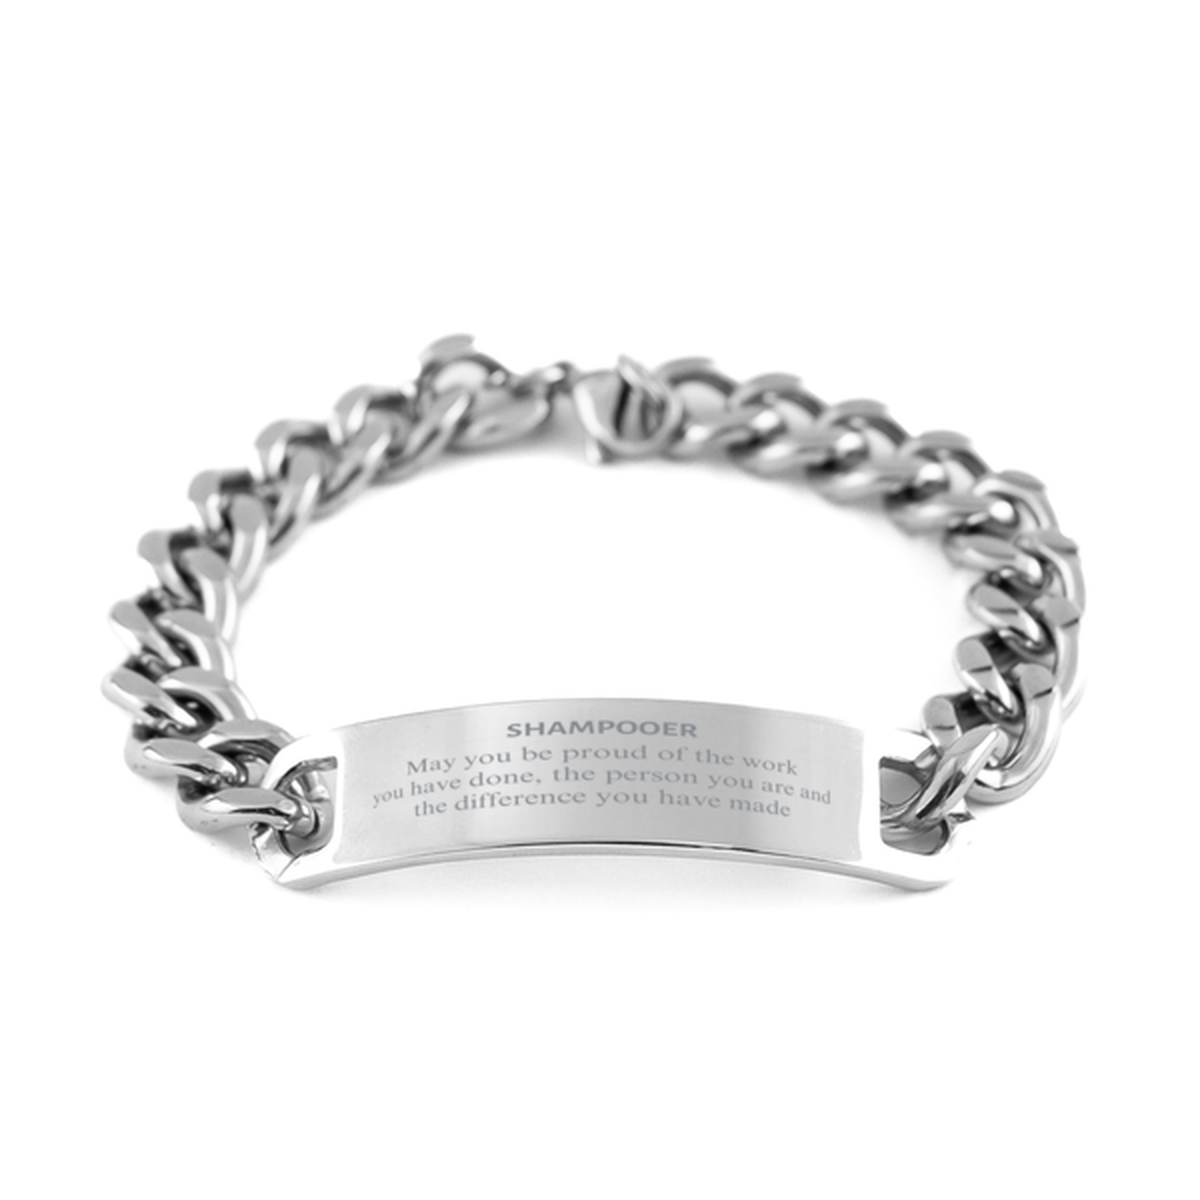 Shampooer May you be proud of the work you have done, Retirement Shampooer Cuban Chain Stainless Steel Bracelet for Colleague Appreciation Gifts Amazing for Shampooer